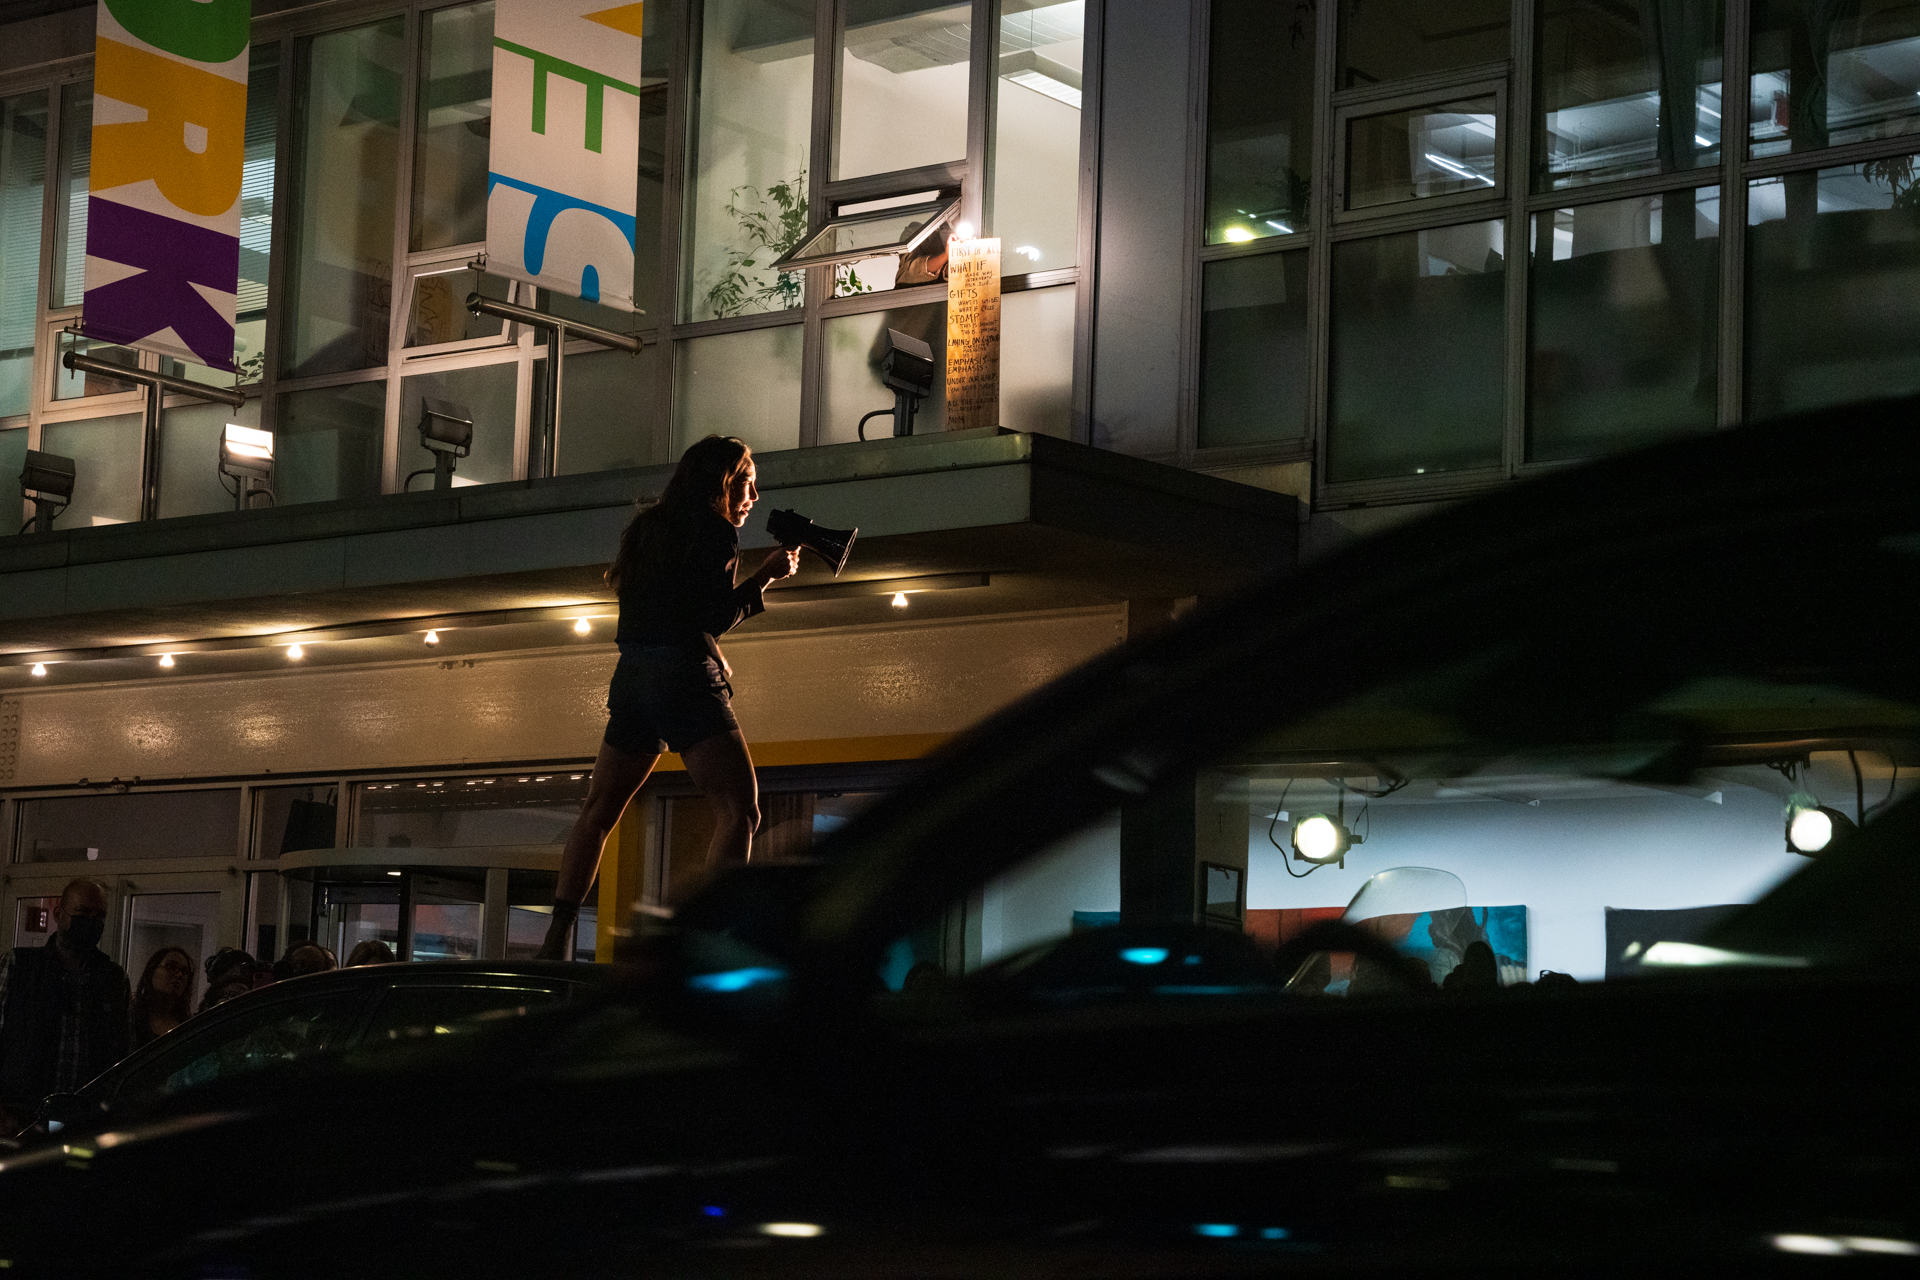 Emily Johnson stands on car , speaking through a megaphone. She is in silhouette outside New York Live Arts addressing a crowd.